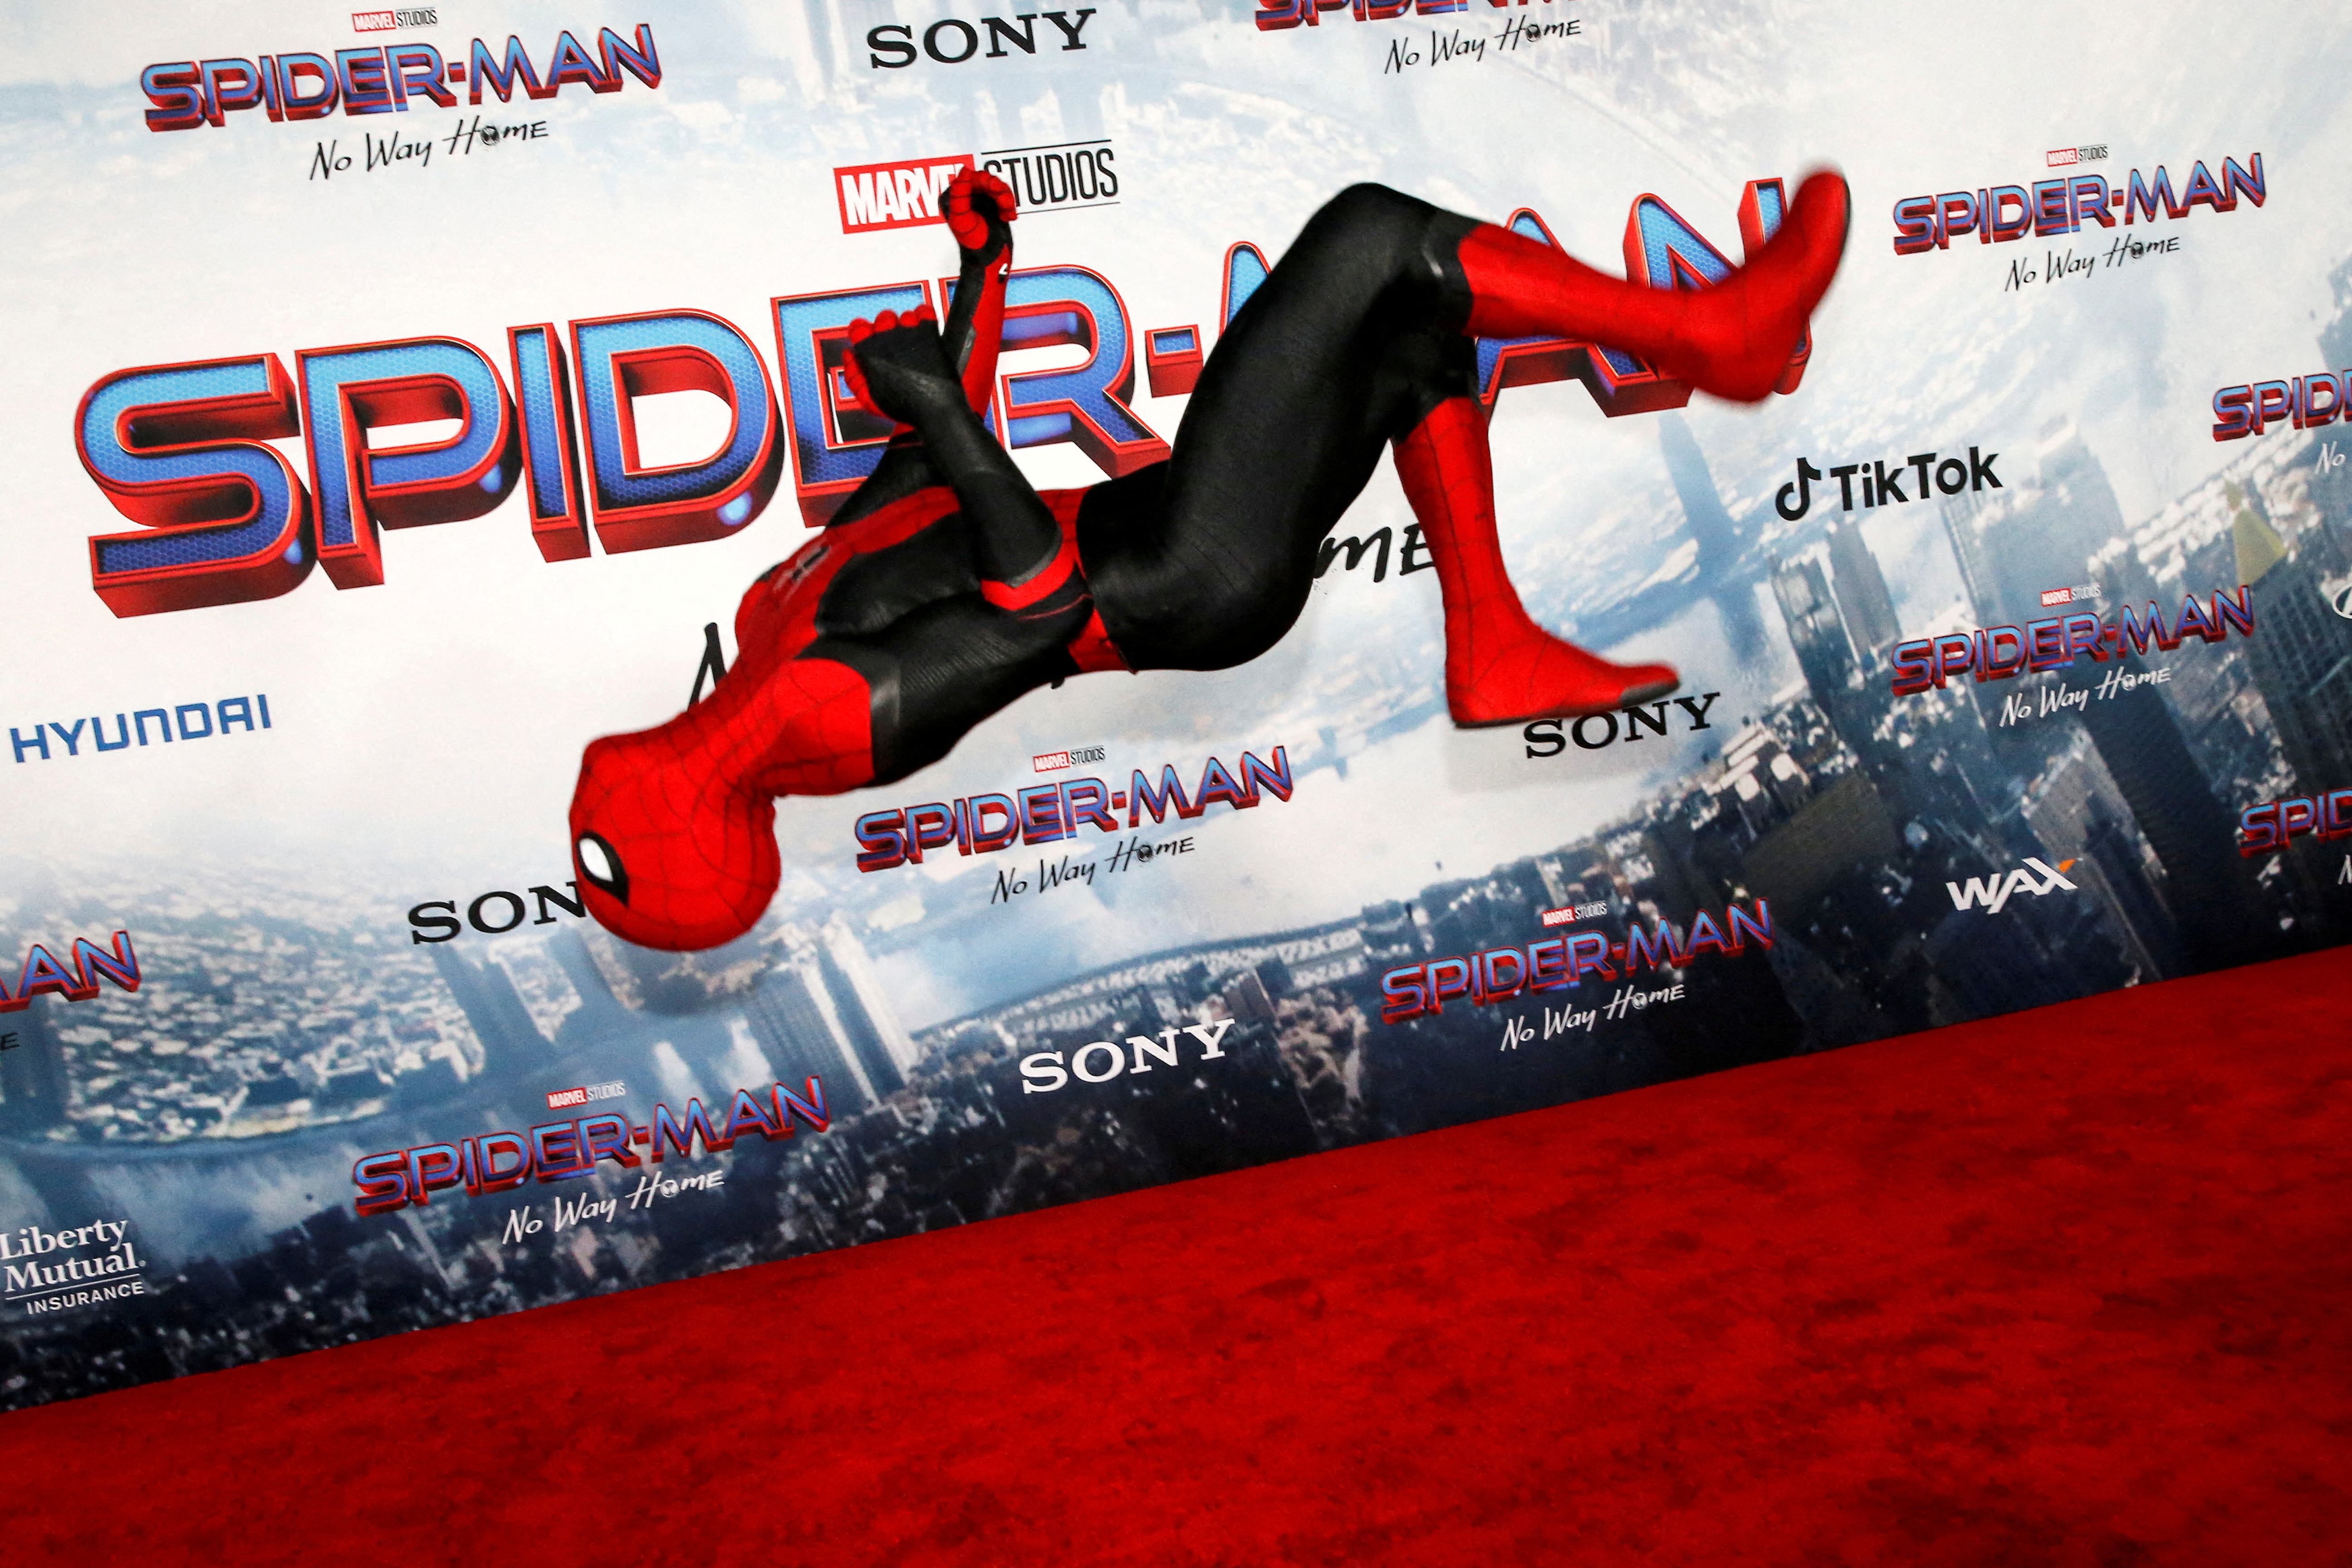 A person dressed in Spider-Man costume performs at the premiere for the film Spider-Man: No Way Home in Los Angeles, California, December 13, 2021. REUTERS/Mario Anzuoni